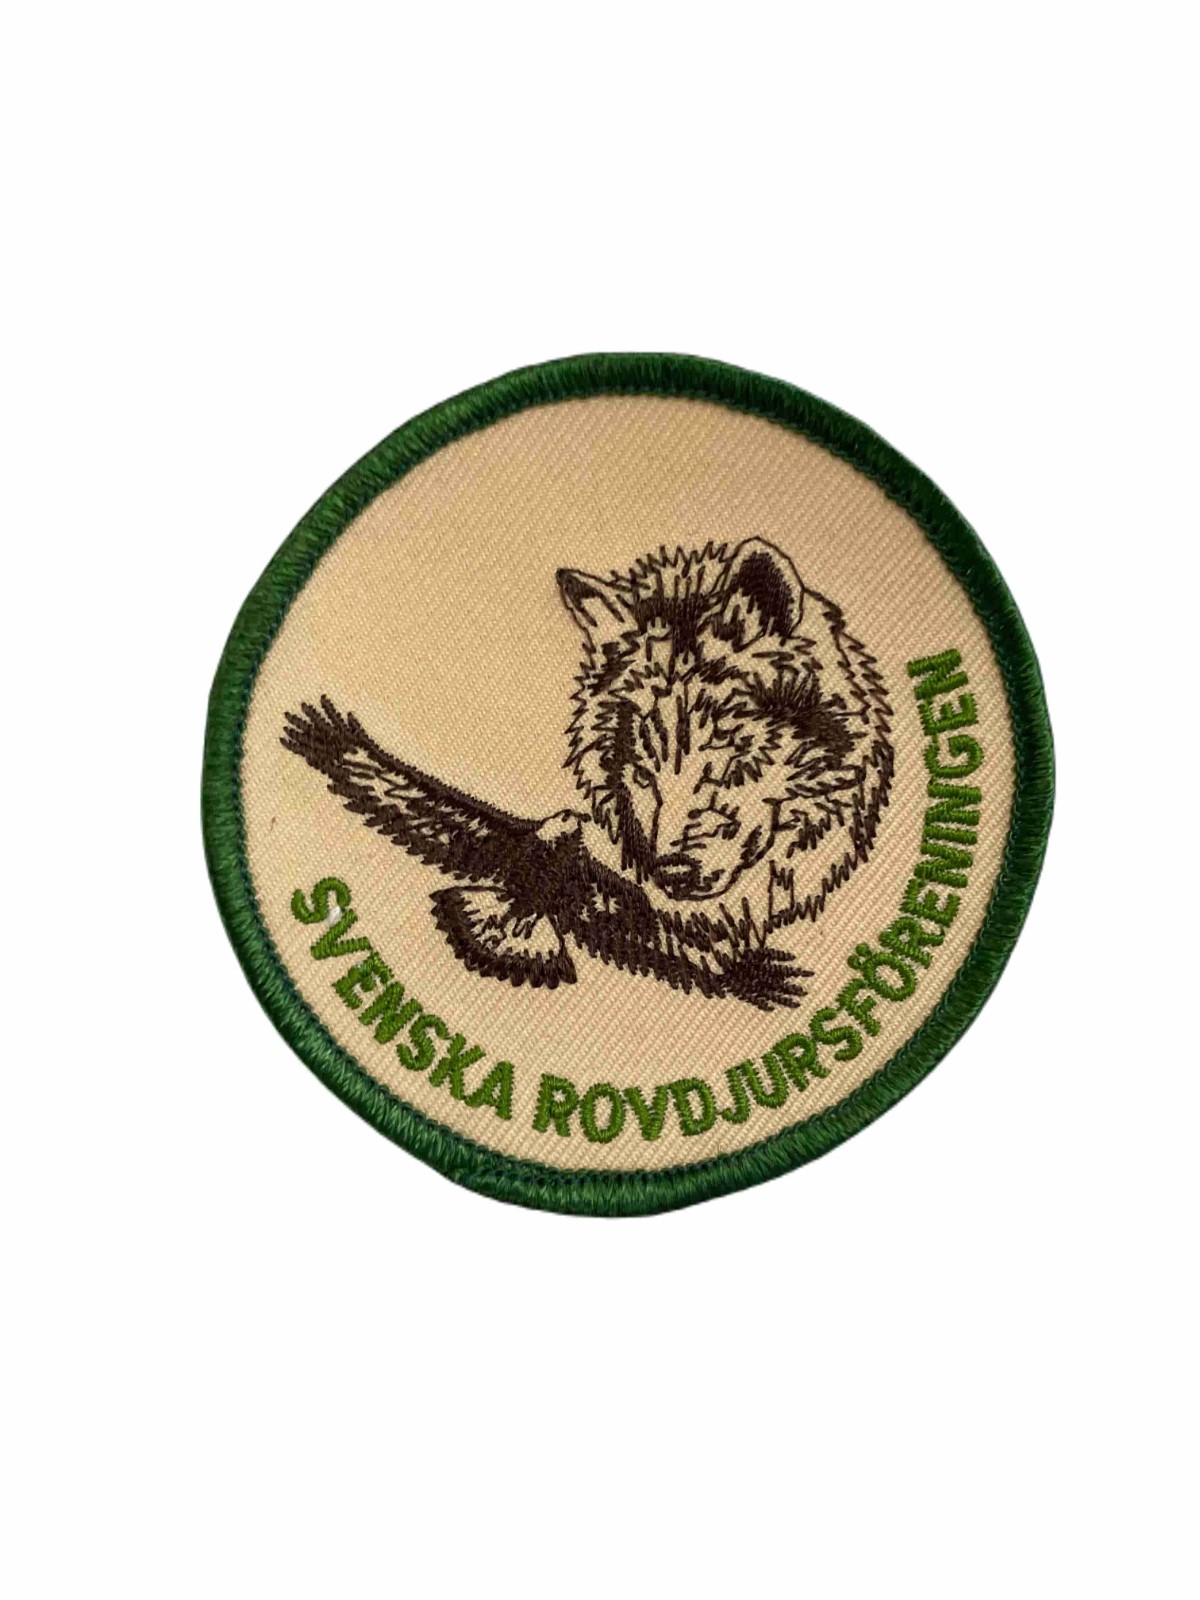 FIne Embroidered Patch with animal design customized